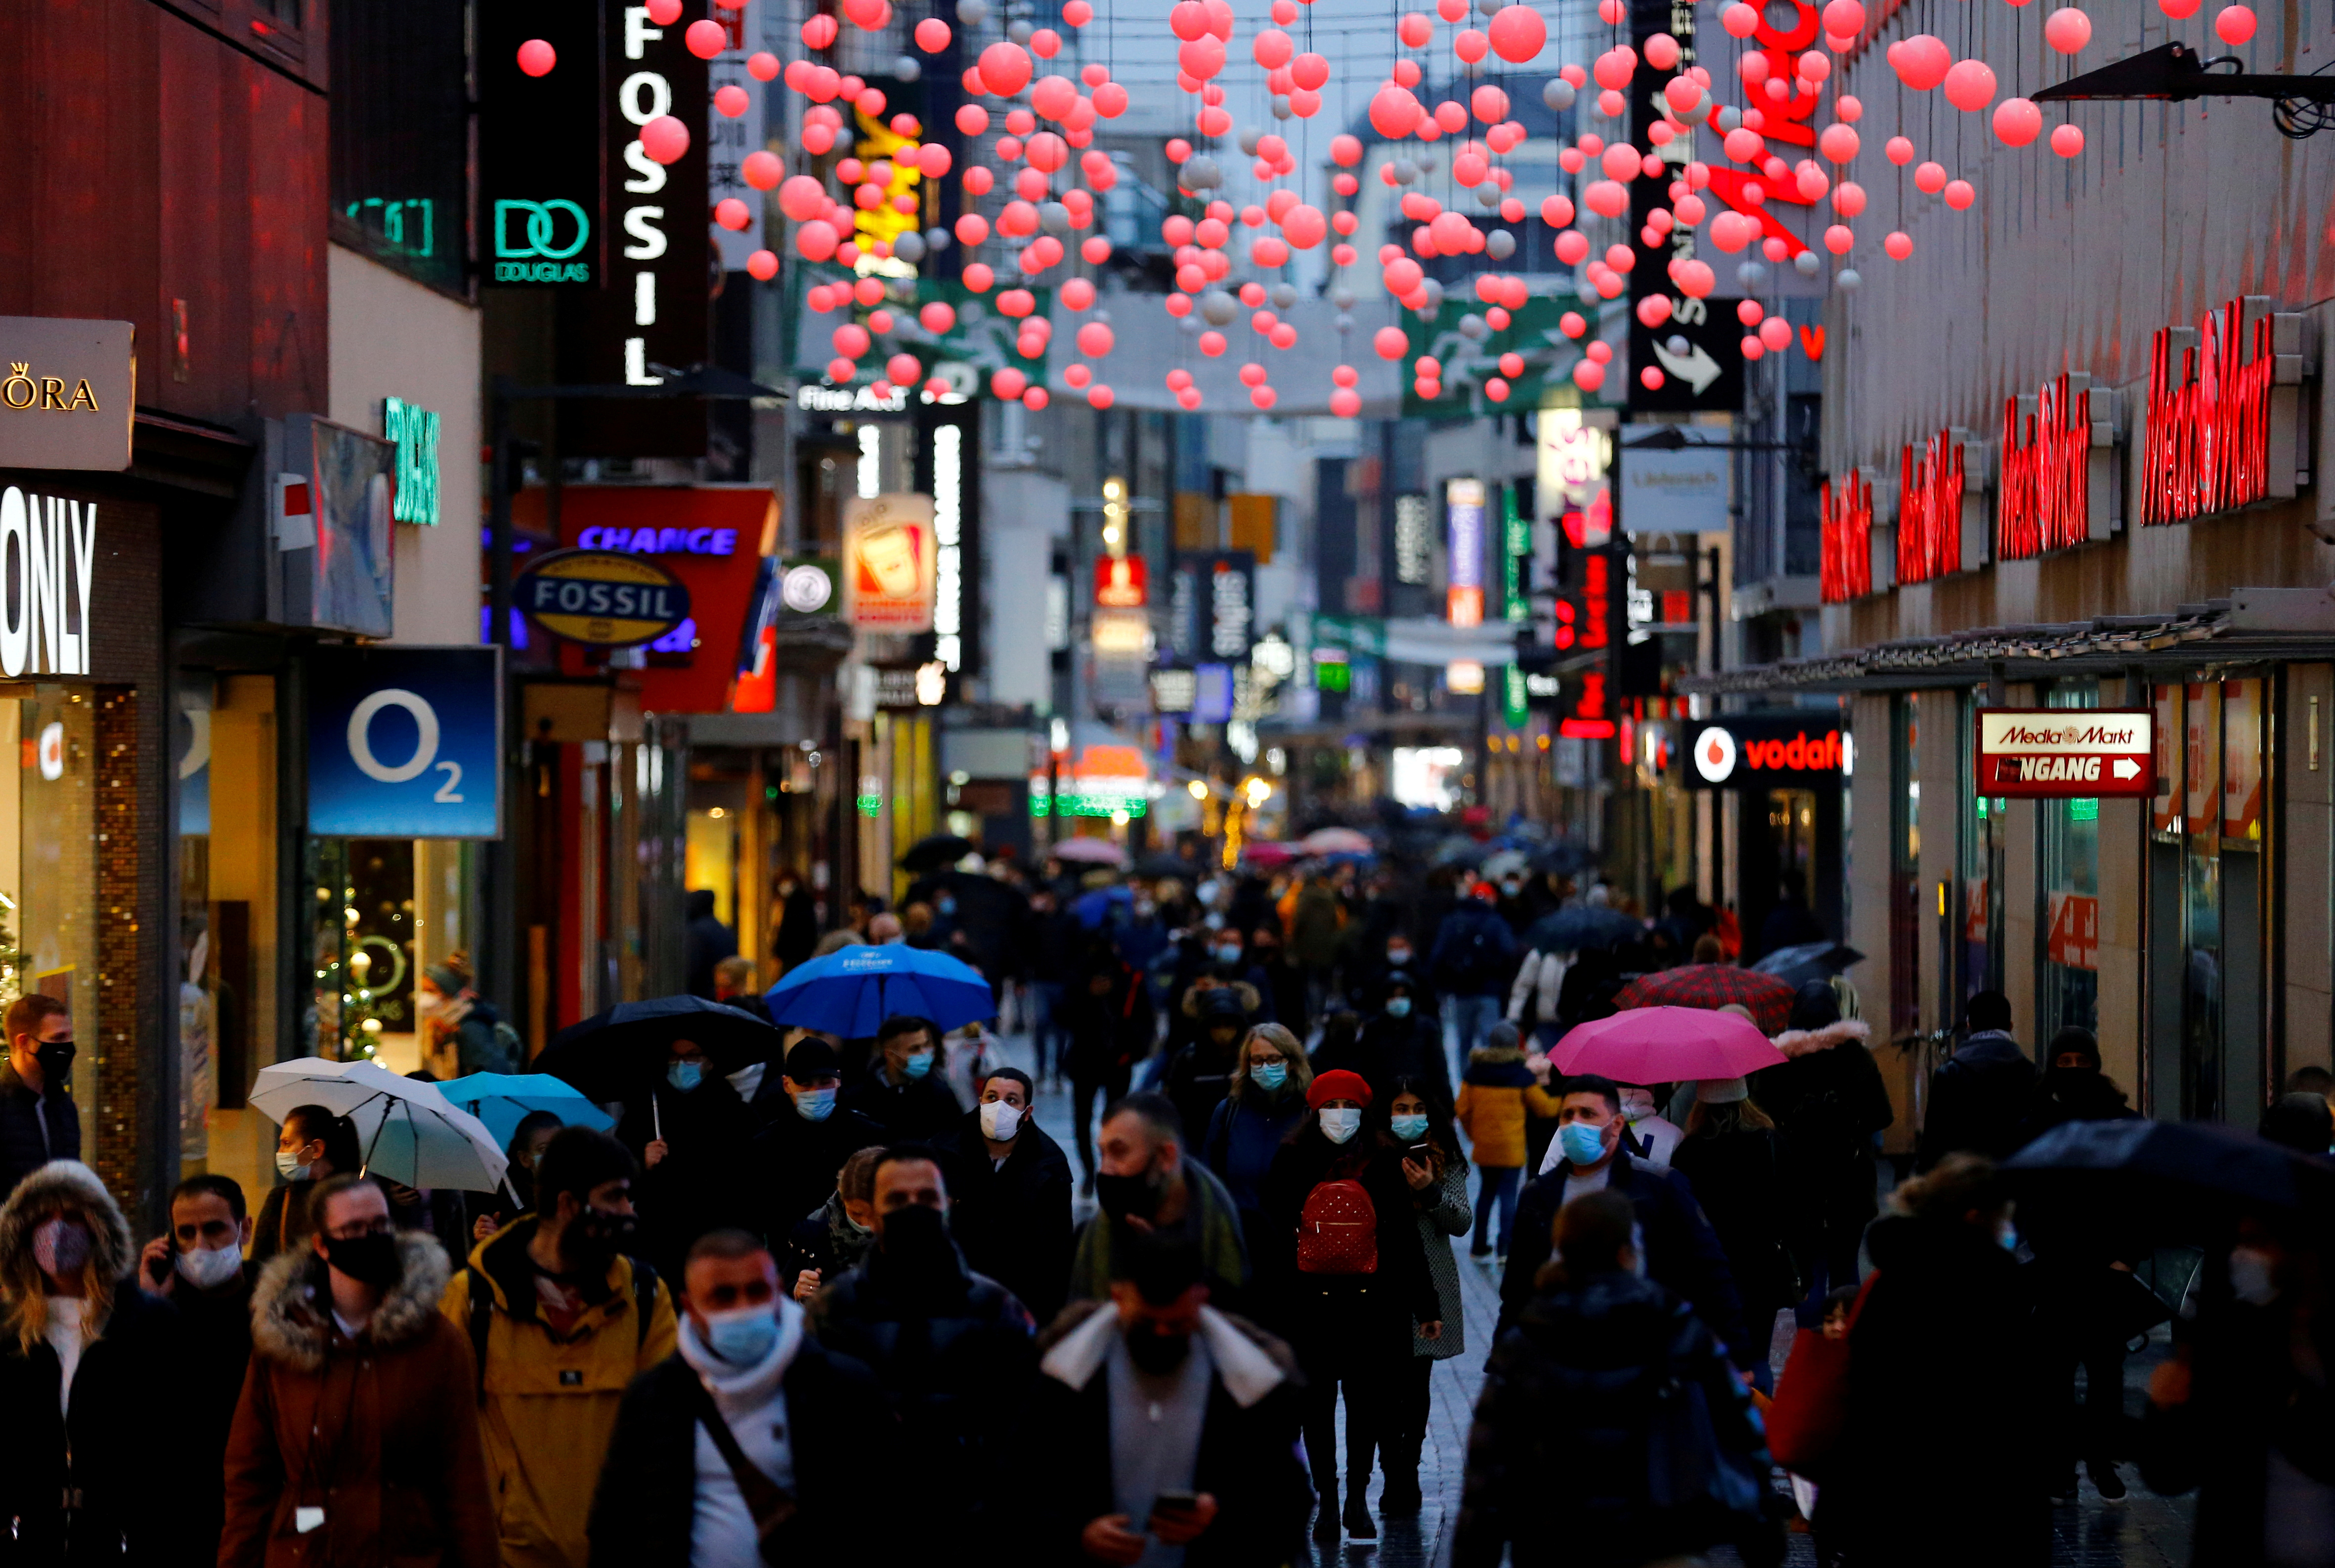 Shoppers walk down Hohe Strasse shopping district in Cologne, Germany, December 15, 2020. REUTERS/Thilo Schmuelgen